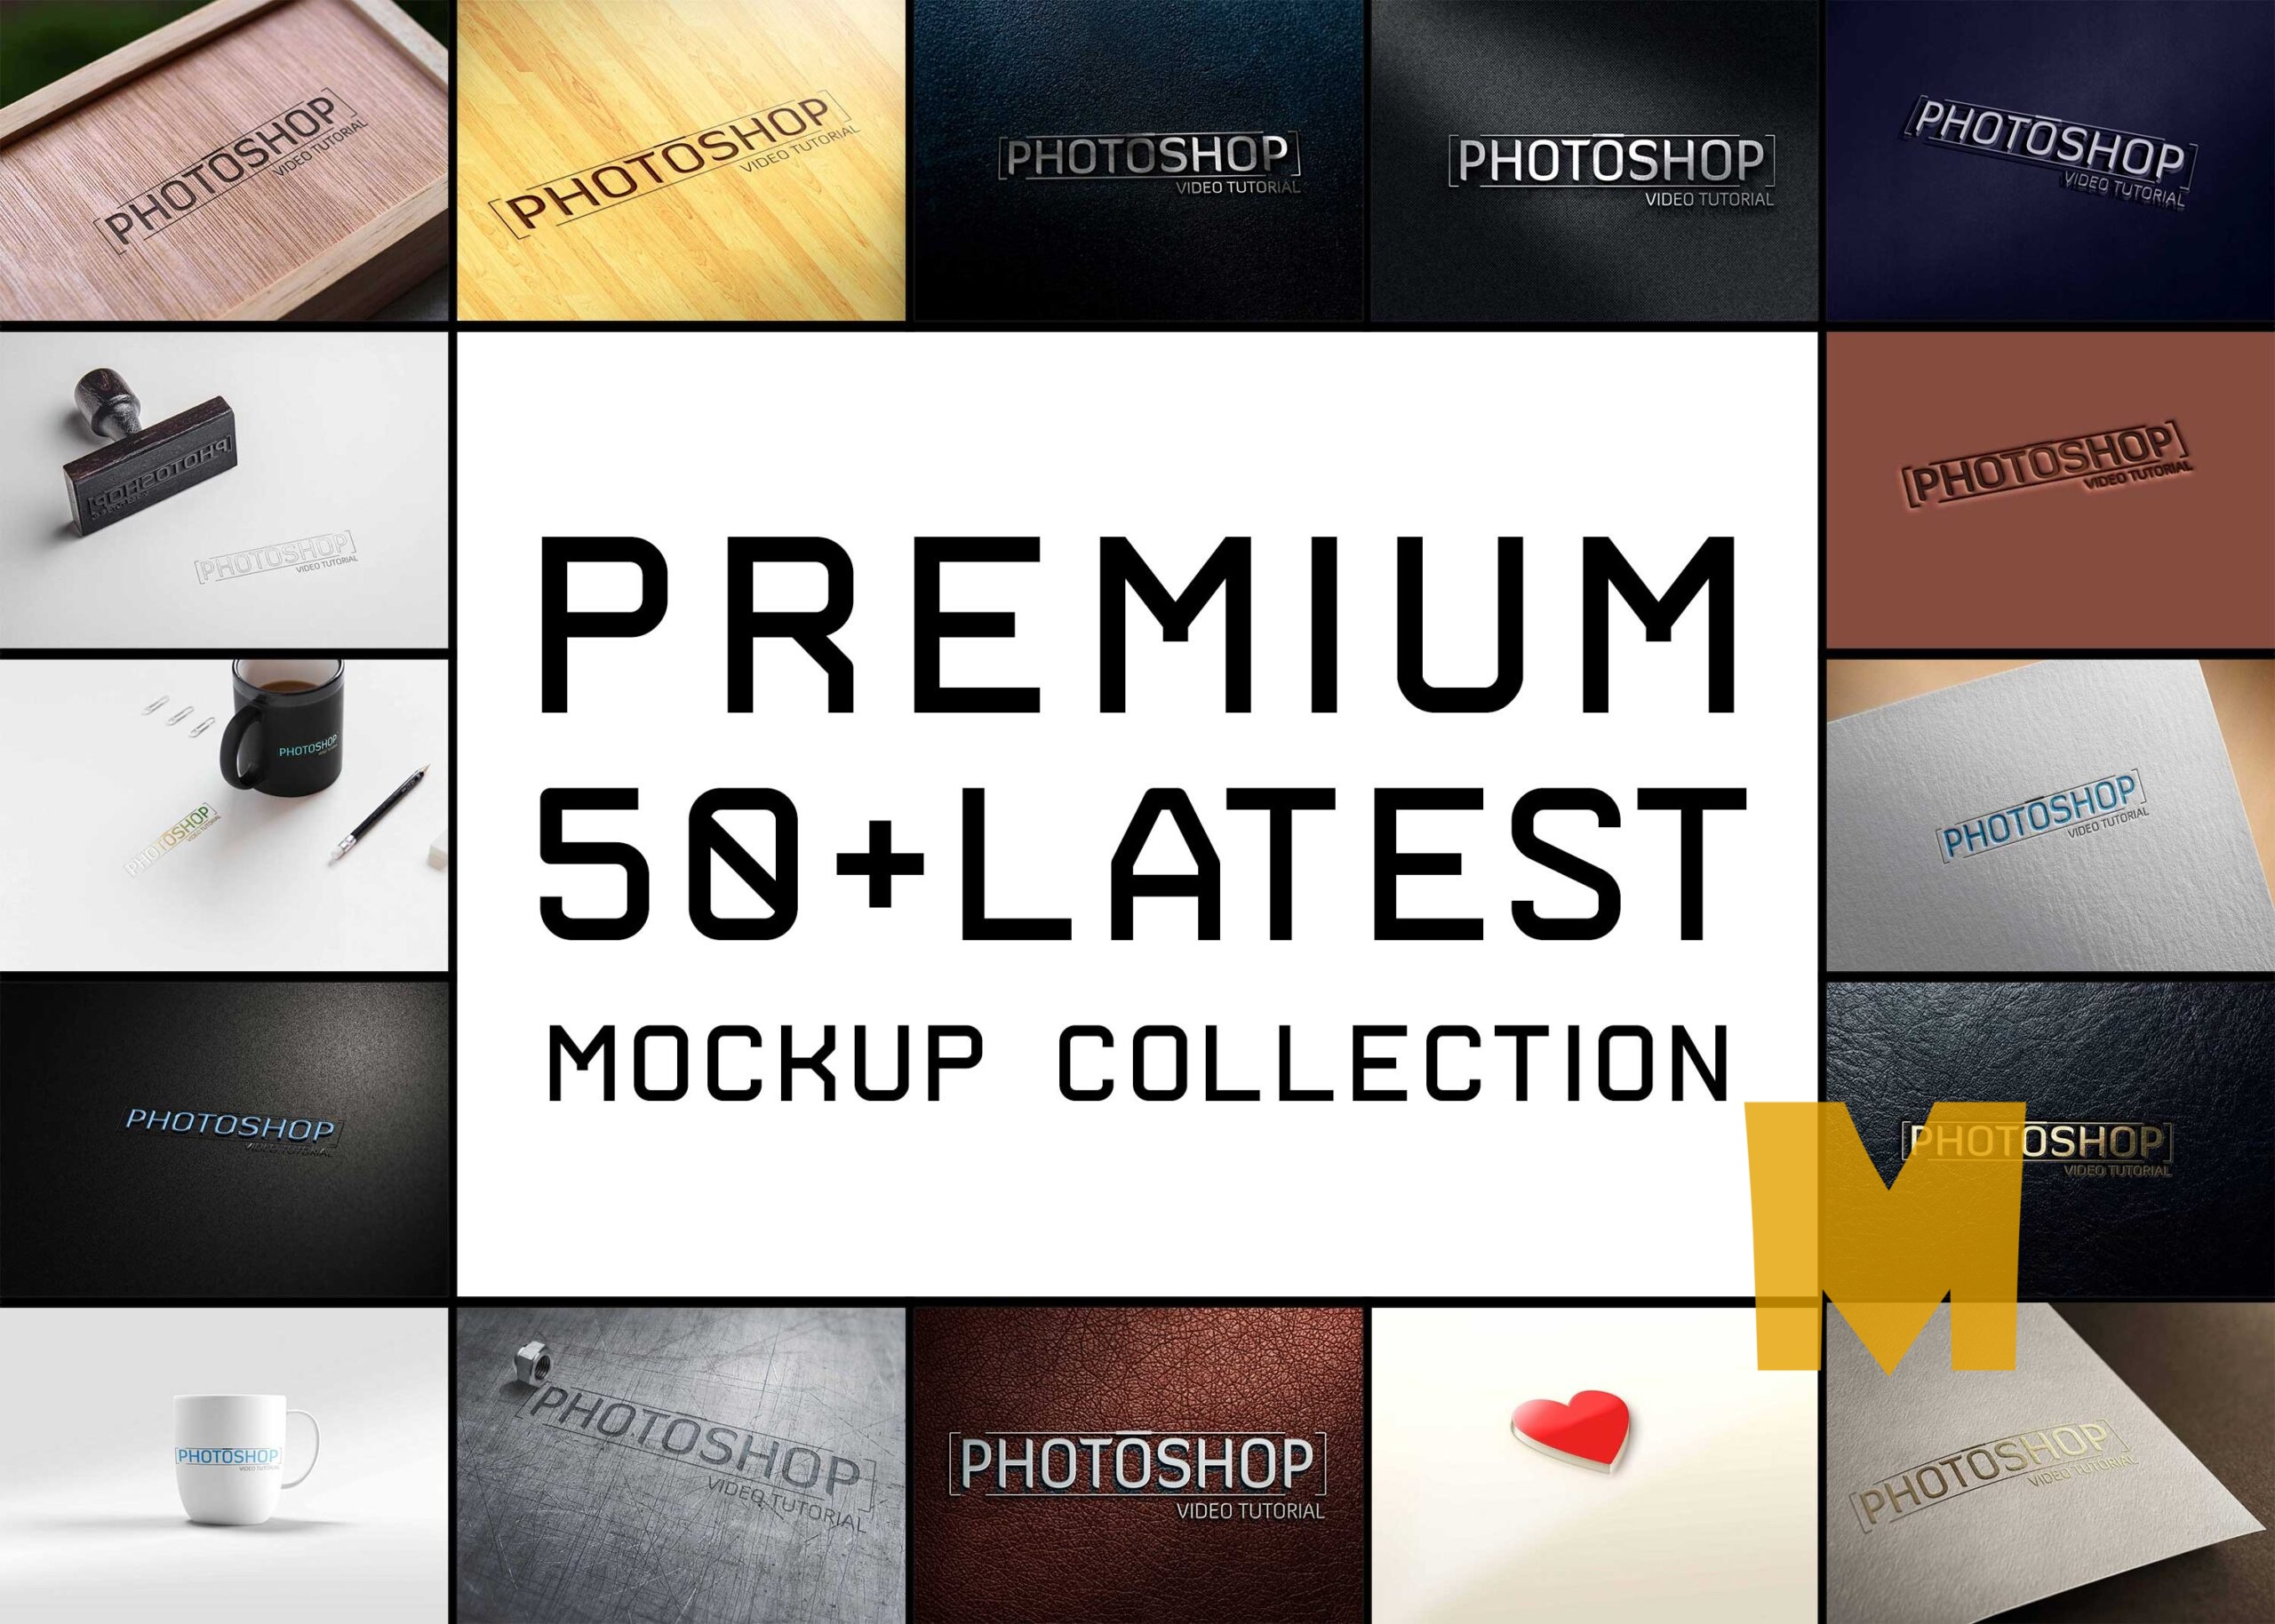 Top 50 Latest Mockup Collection